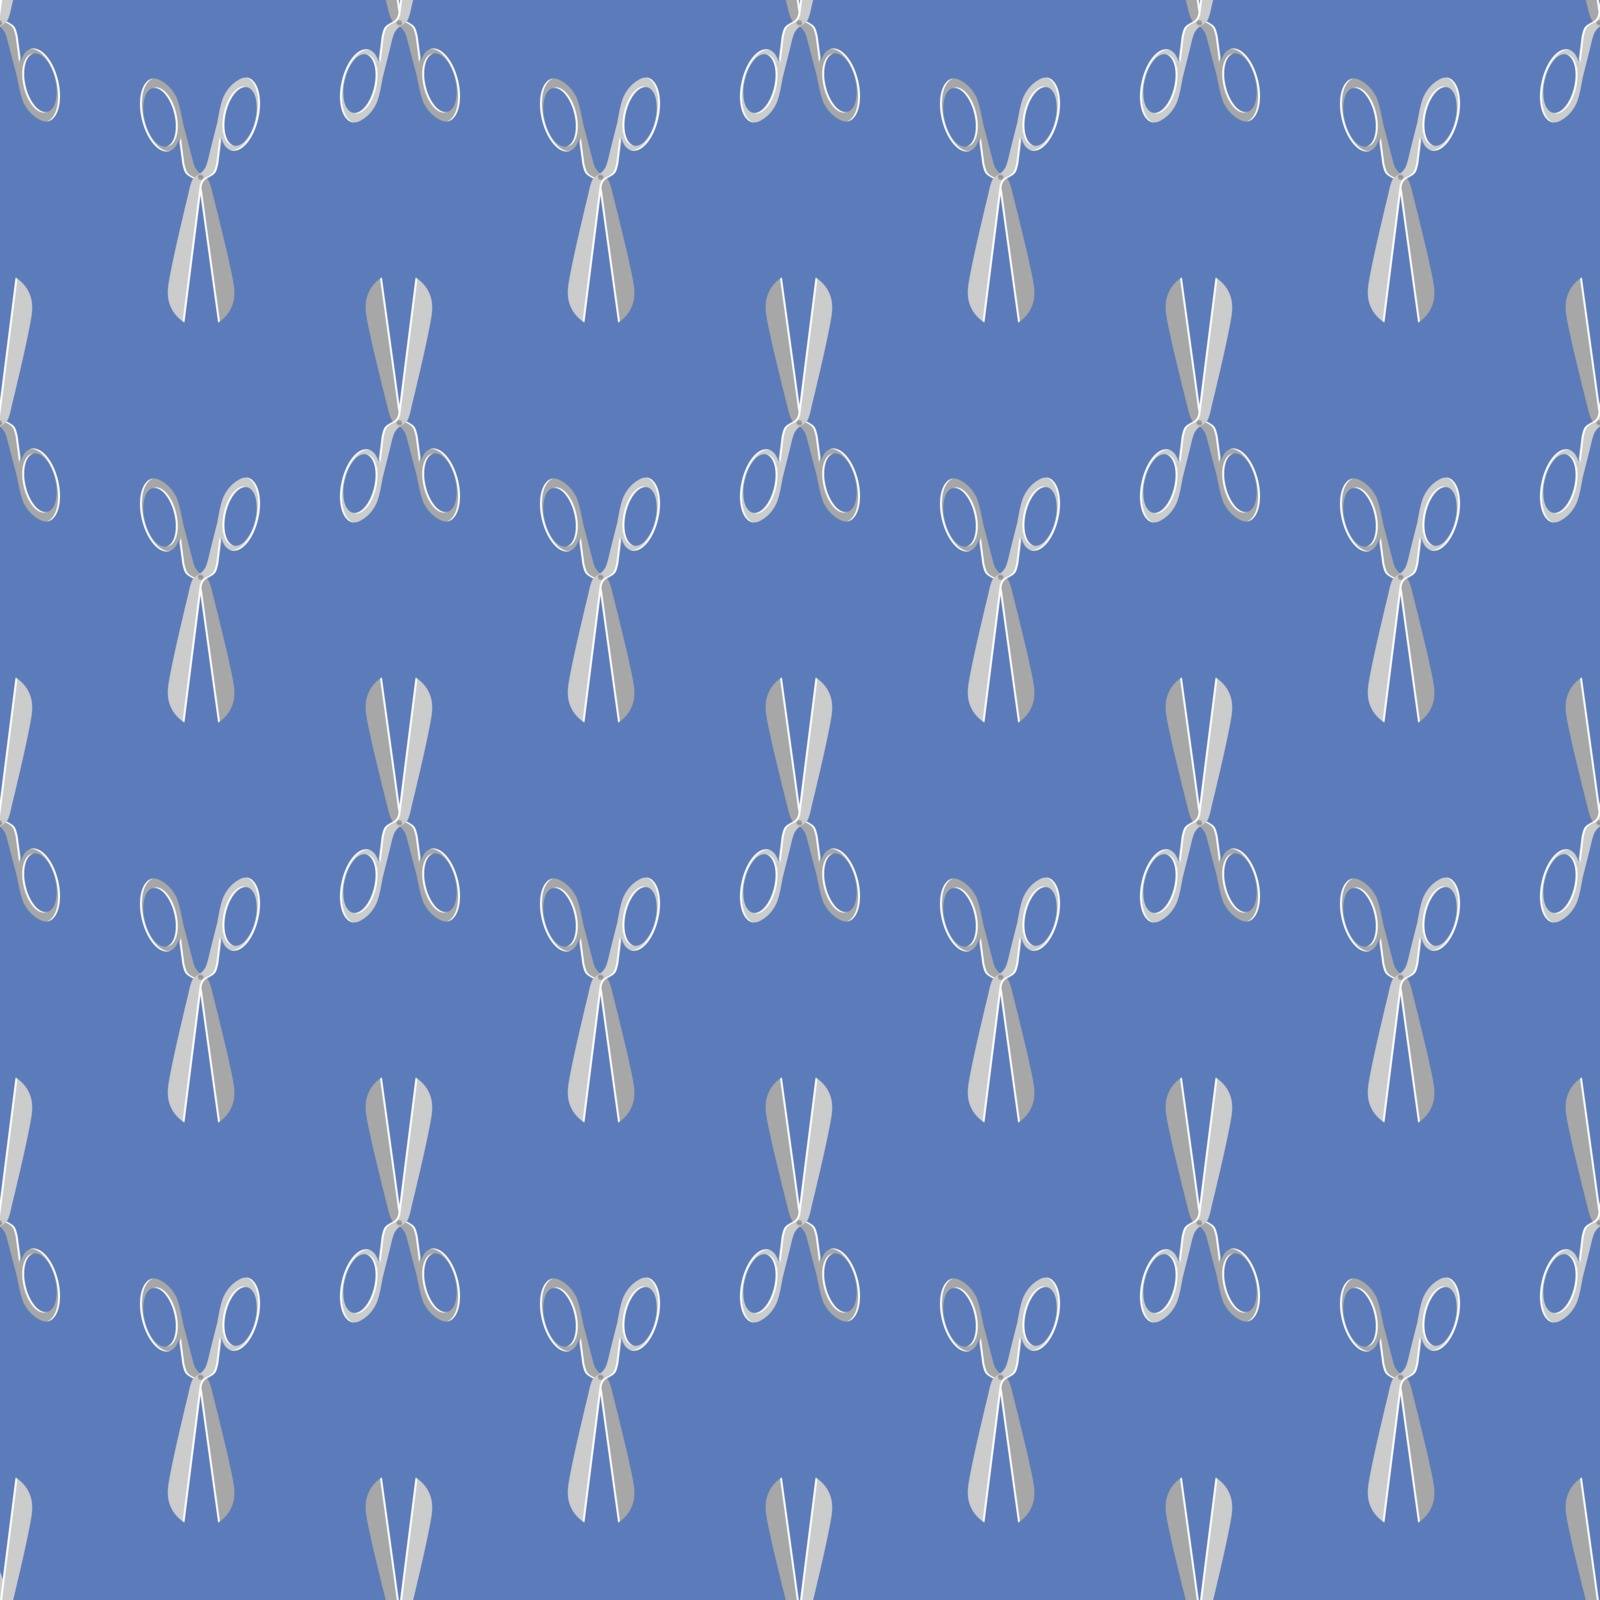 Scissors Seamless Pattern Isolated on Blue Background. Barber Symbol